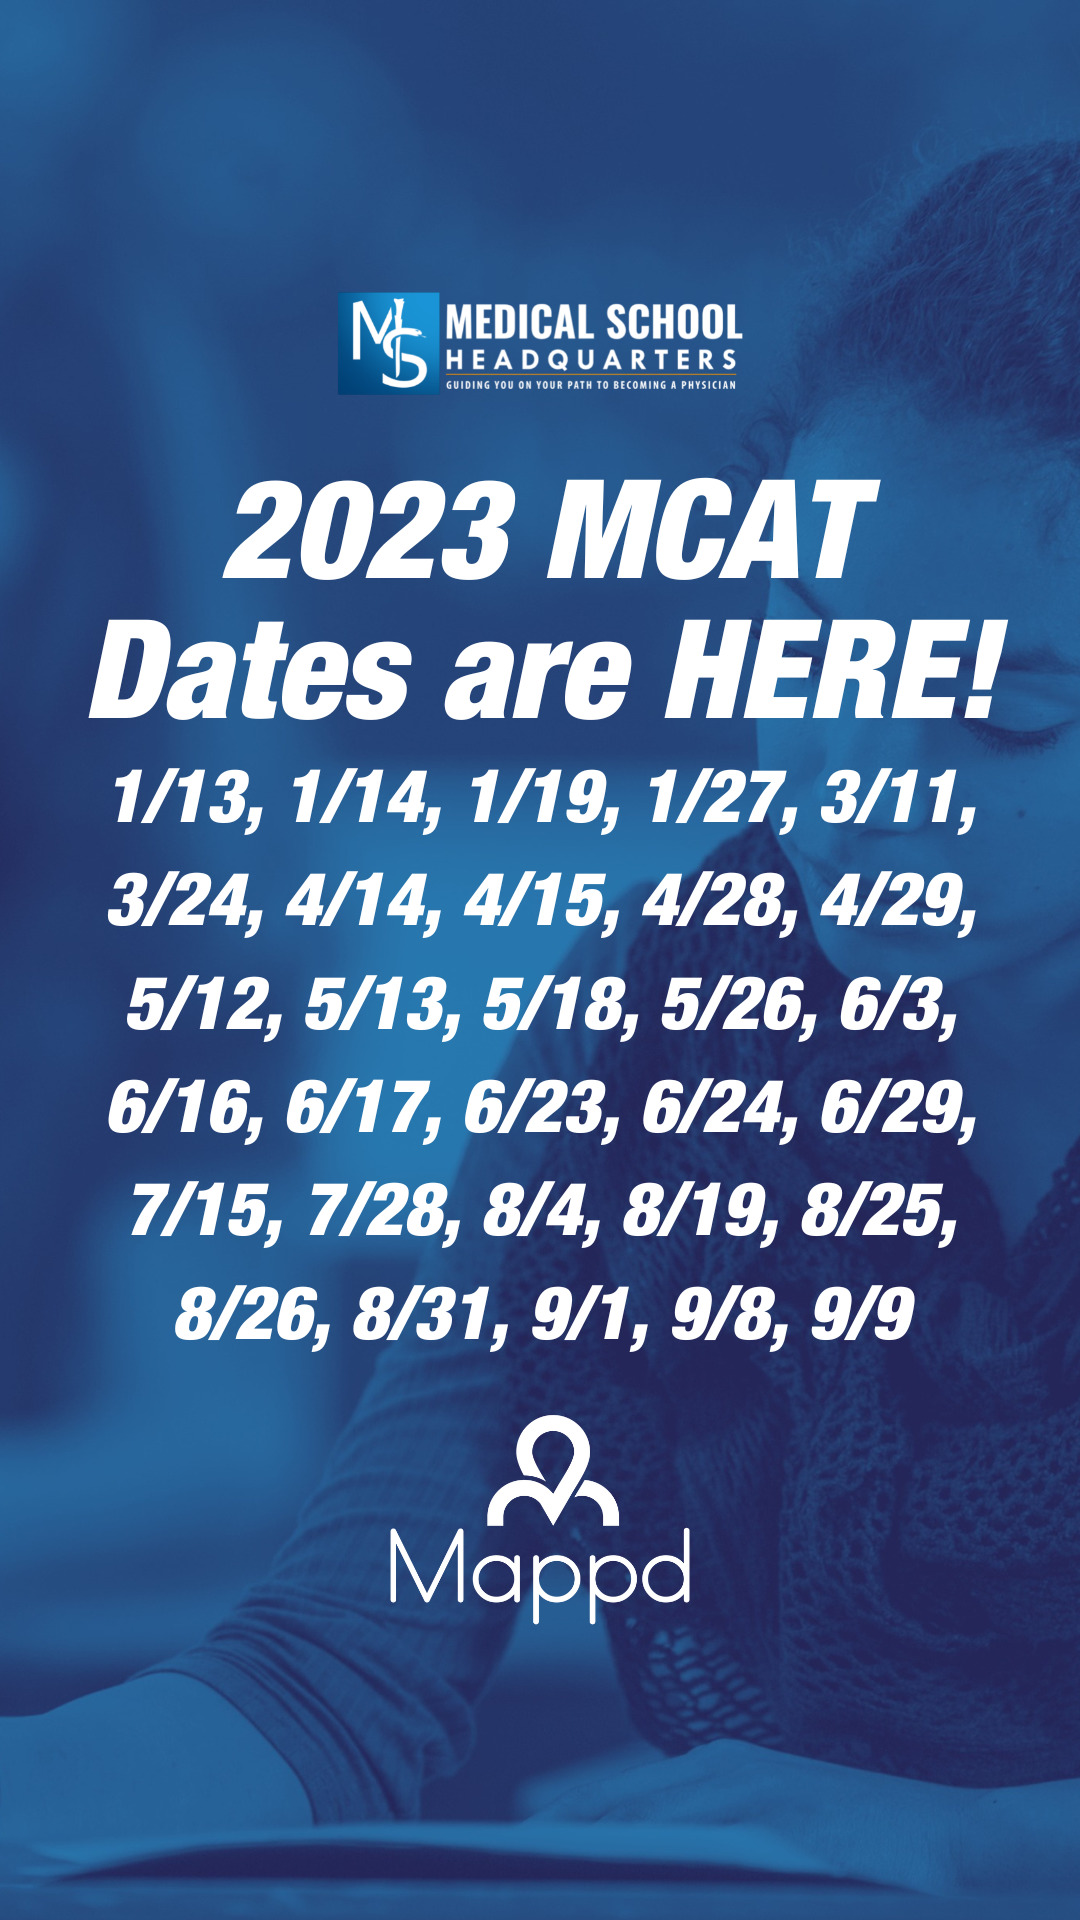 What You Need to Know About MCAT Registration (2023) - Medical School Headquarters